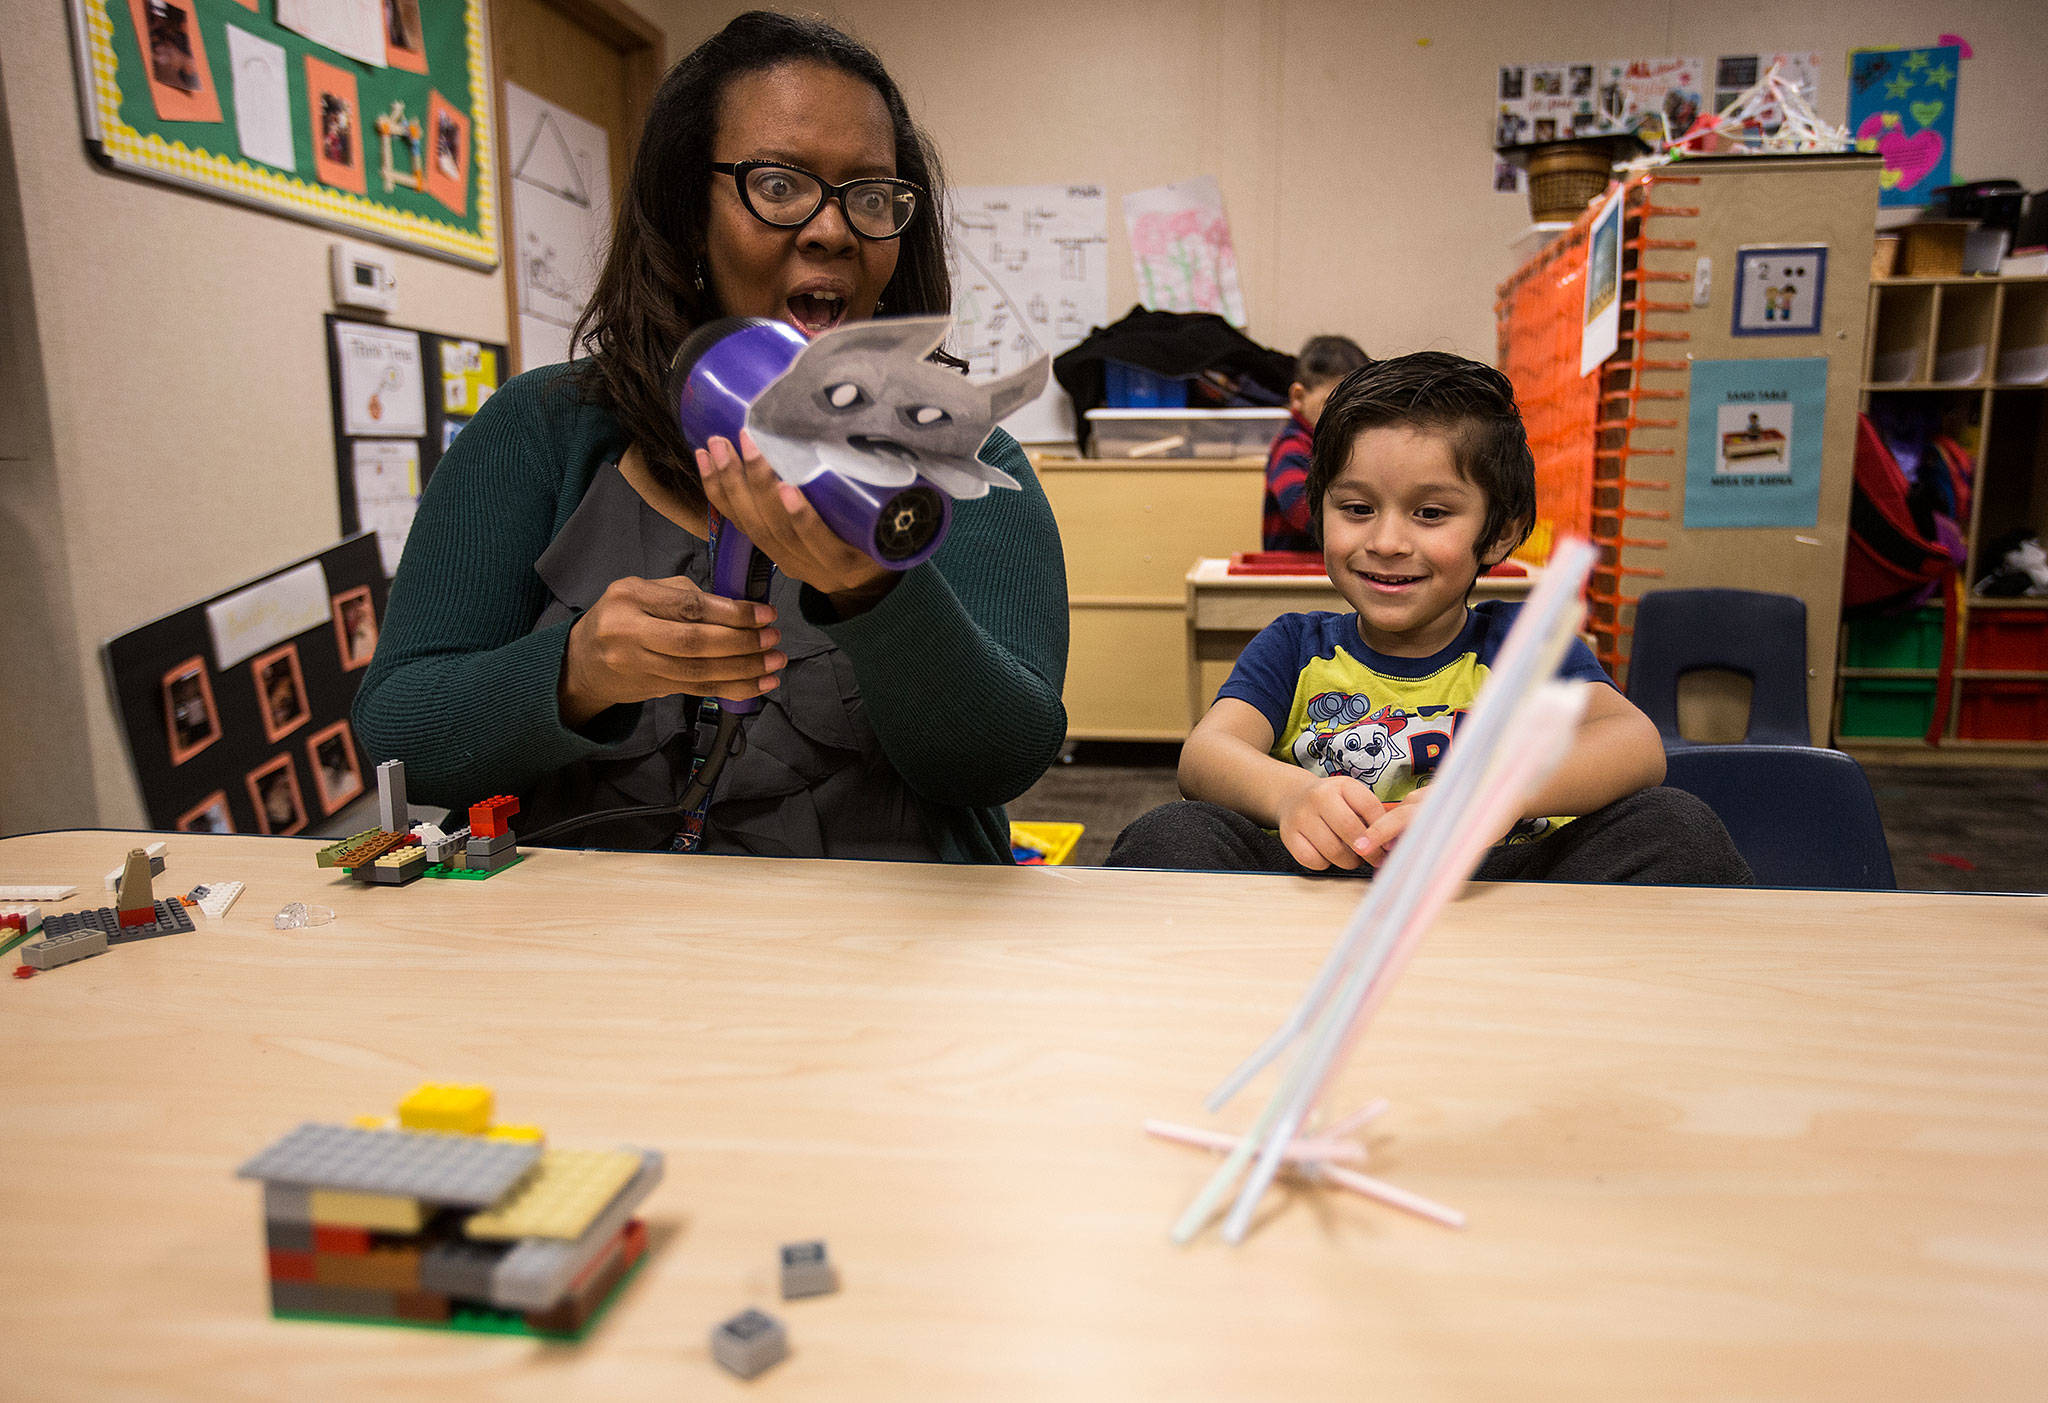 Lowell Elementary teacher Erin Marrow uses a blow dryer to represent the Big Bad Wolf to move a straw house across the table as Giovanni De Jesus Olmos watches Thursday in Everett. Using the theme of “The Three Little Pigs,” early learning students use STEM practices to build and test model houses built from straws, popsicle sticks and LEGO bricks. (Andy Bronson / The Herald)